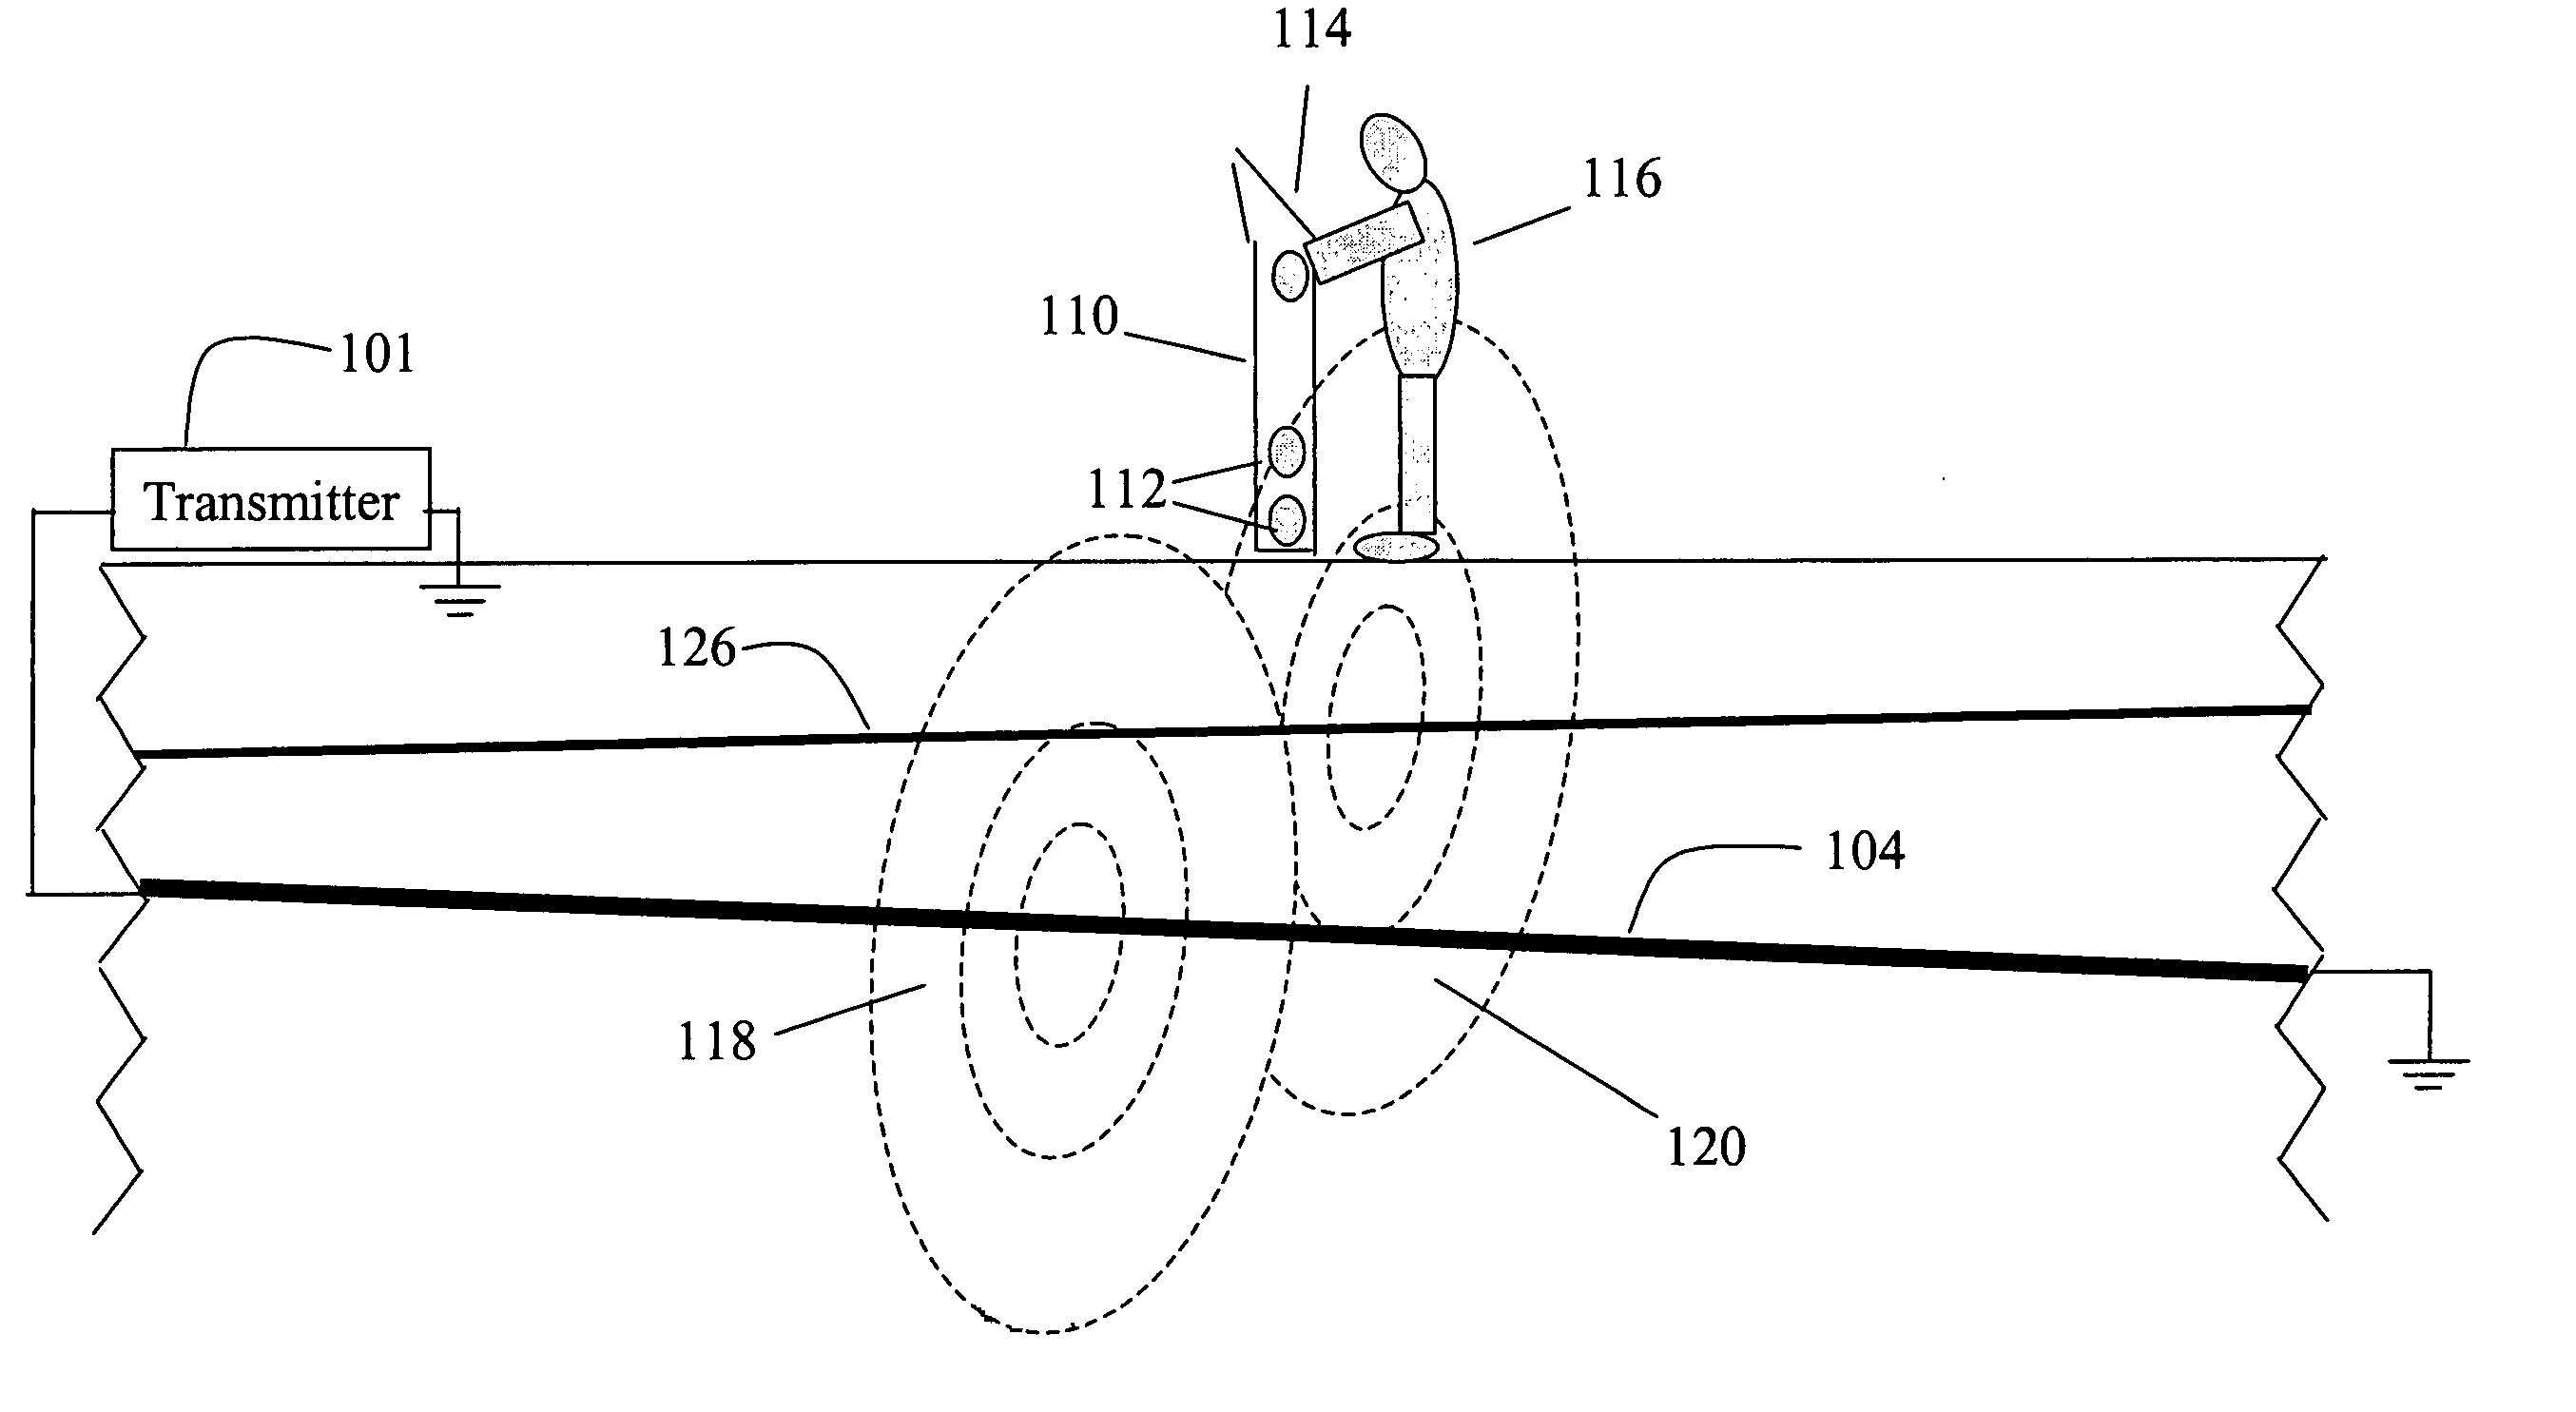 Method for decoupling interference due to bleedover in metallic pipe and cable locators